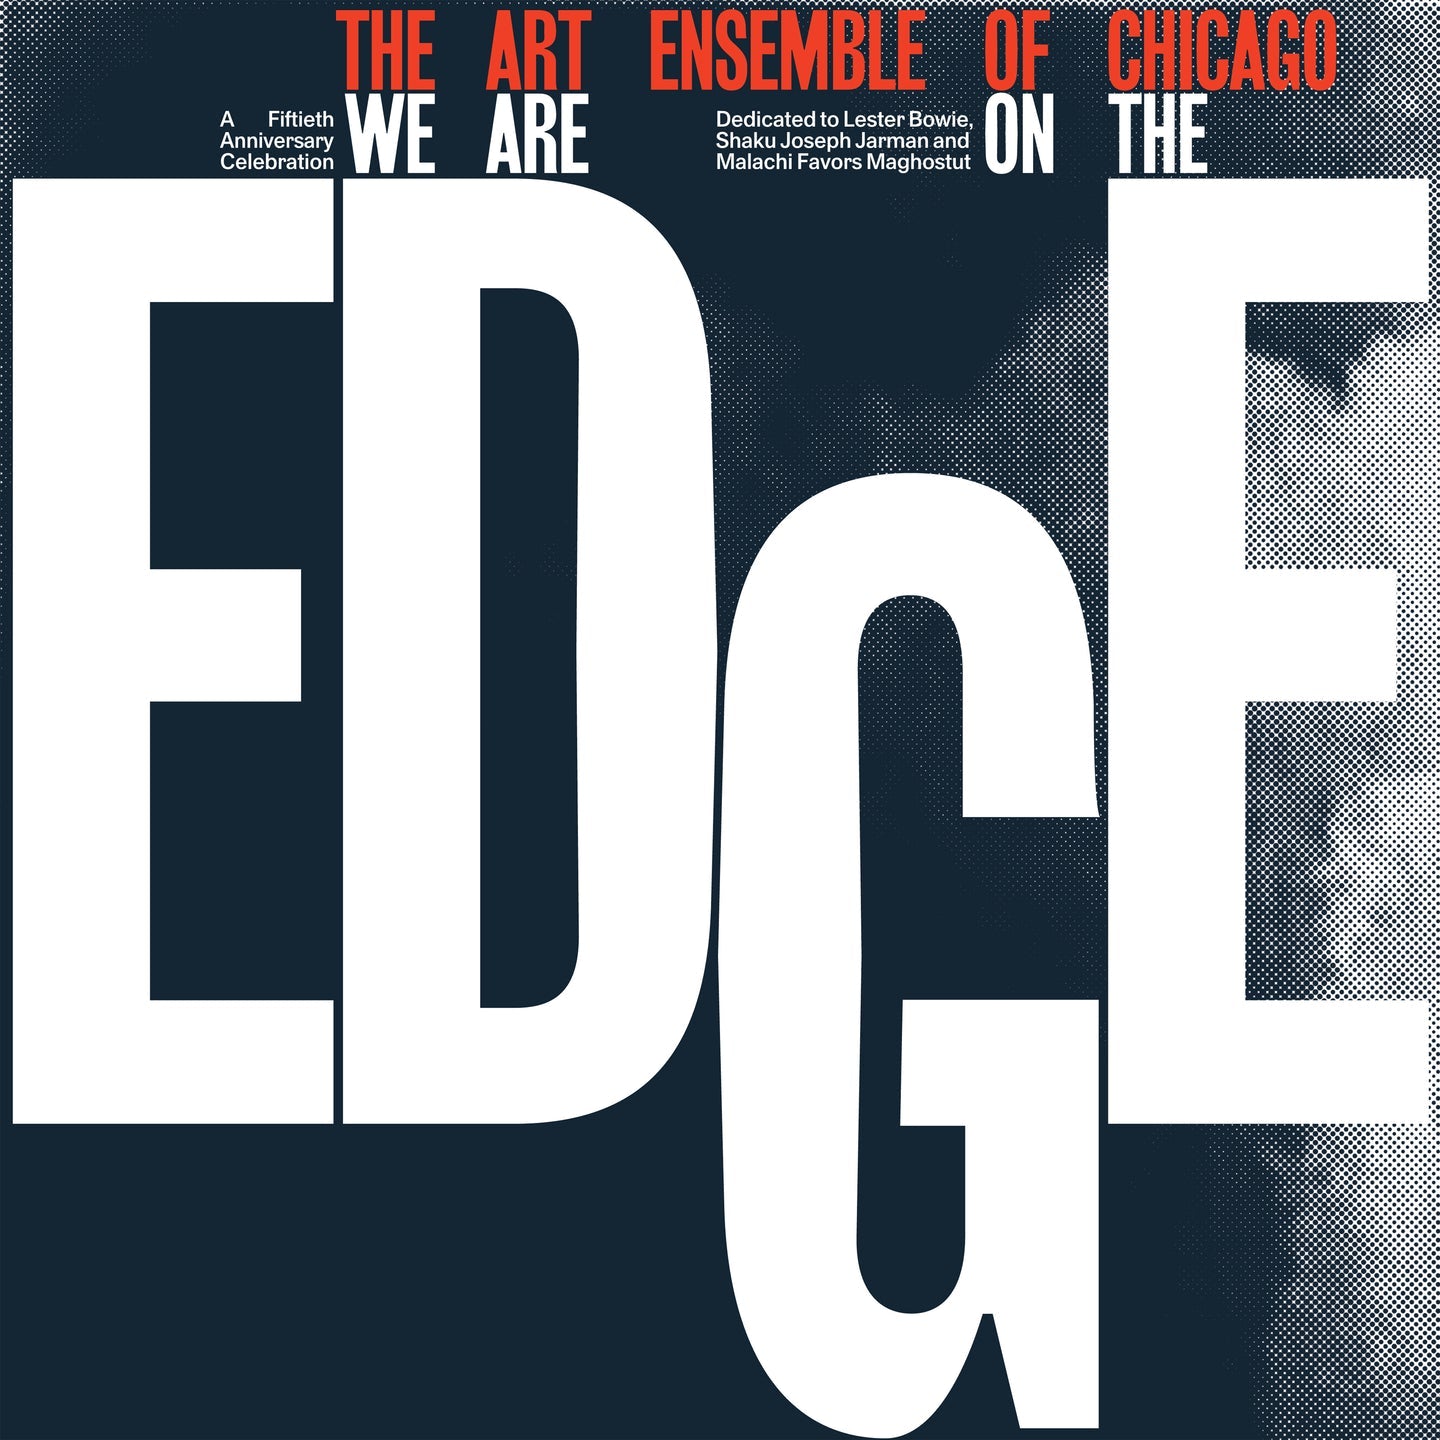 Arcade Sound - Art Ensemble of Chicago - We Are On The Edge front cover